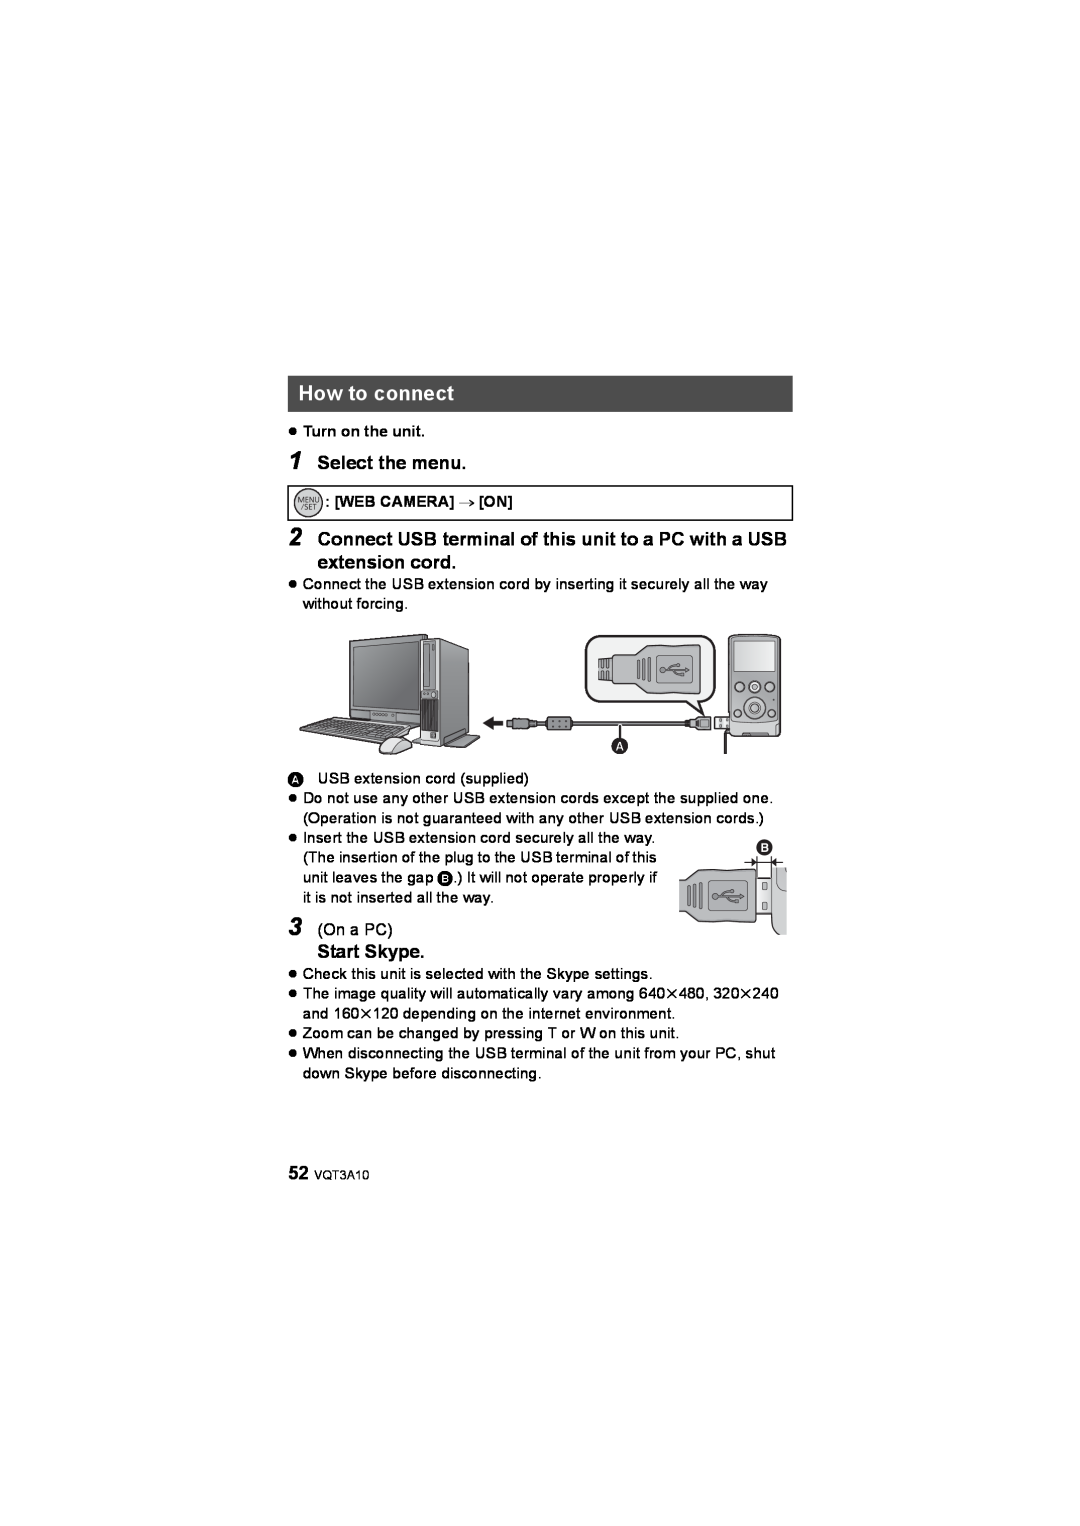 Panasonic HM-TA1 operating instructions How to connect, Start Skype, Select the menu, ≥ Turn on the unit, Web Camera # On 